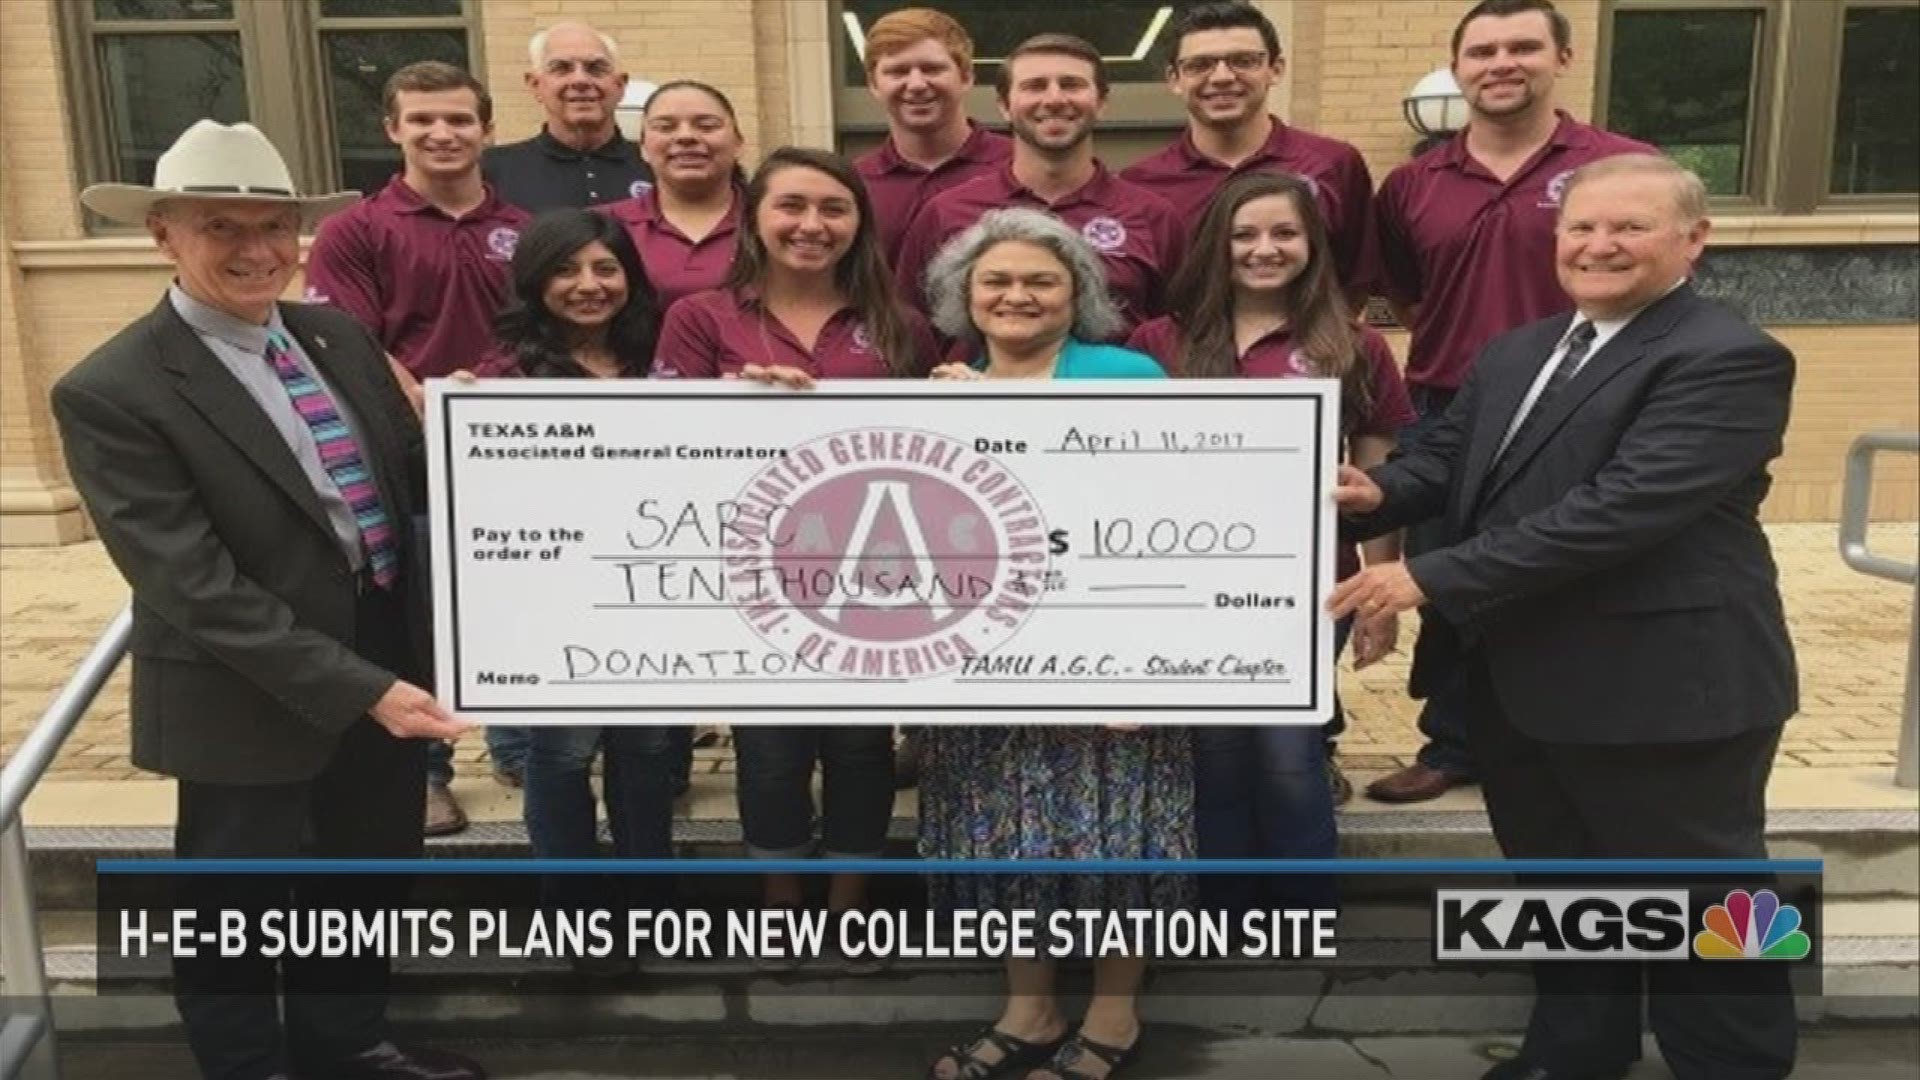 The student chapter of Associated General Contractors donated $10,000 to SARC.